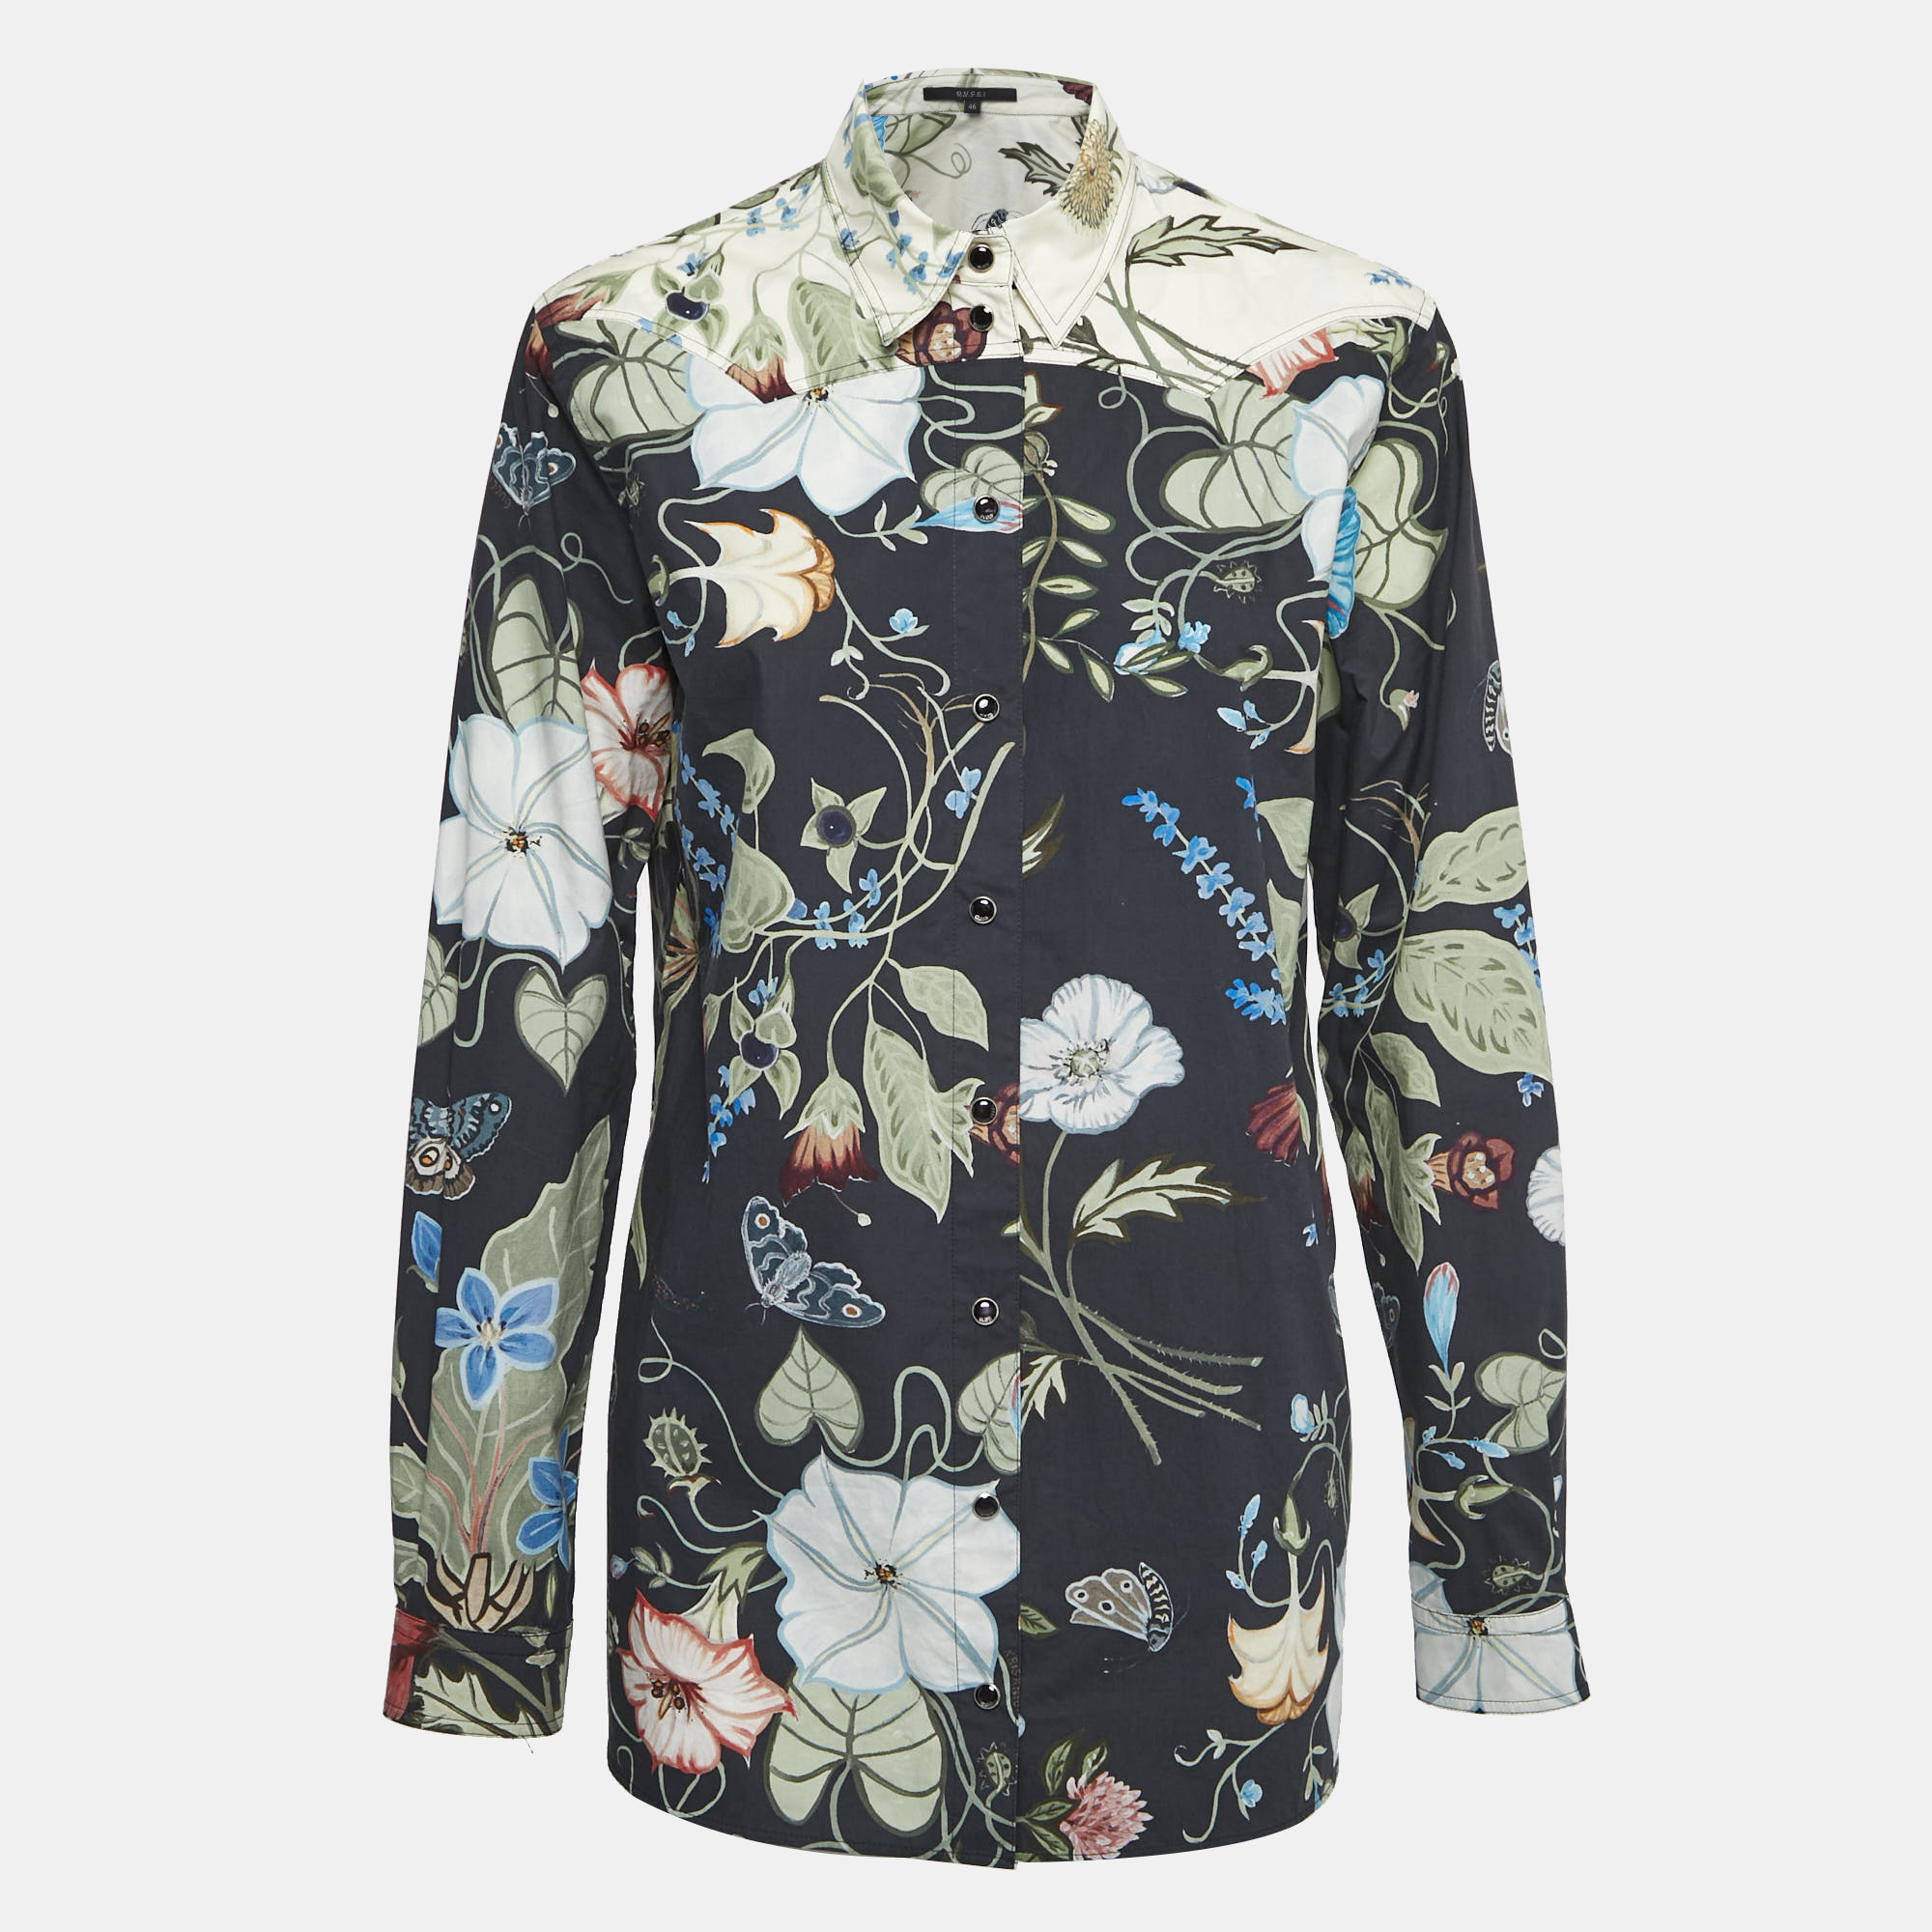 Pre-owned Gucci Black Floral Printed Cotton Shirt L